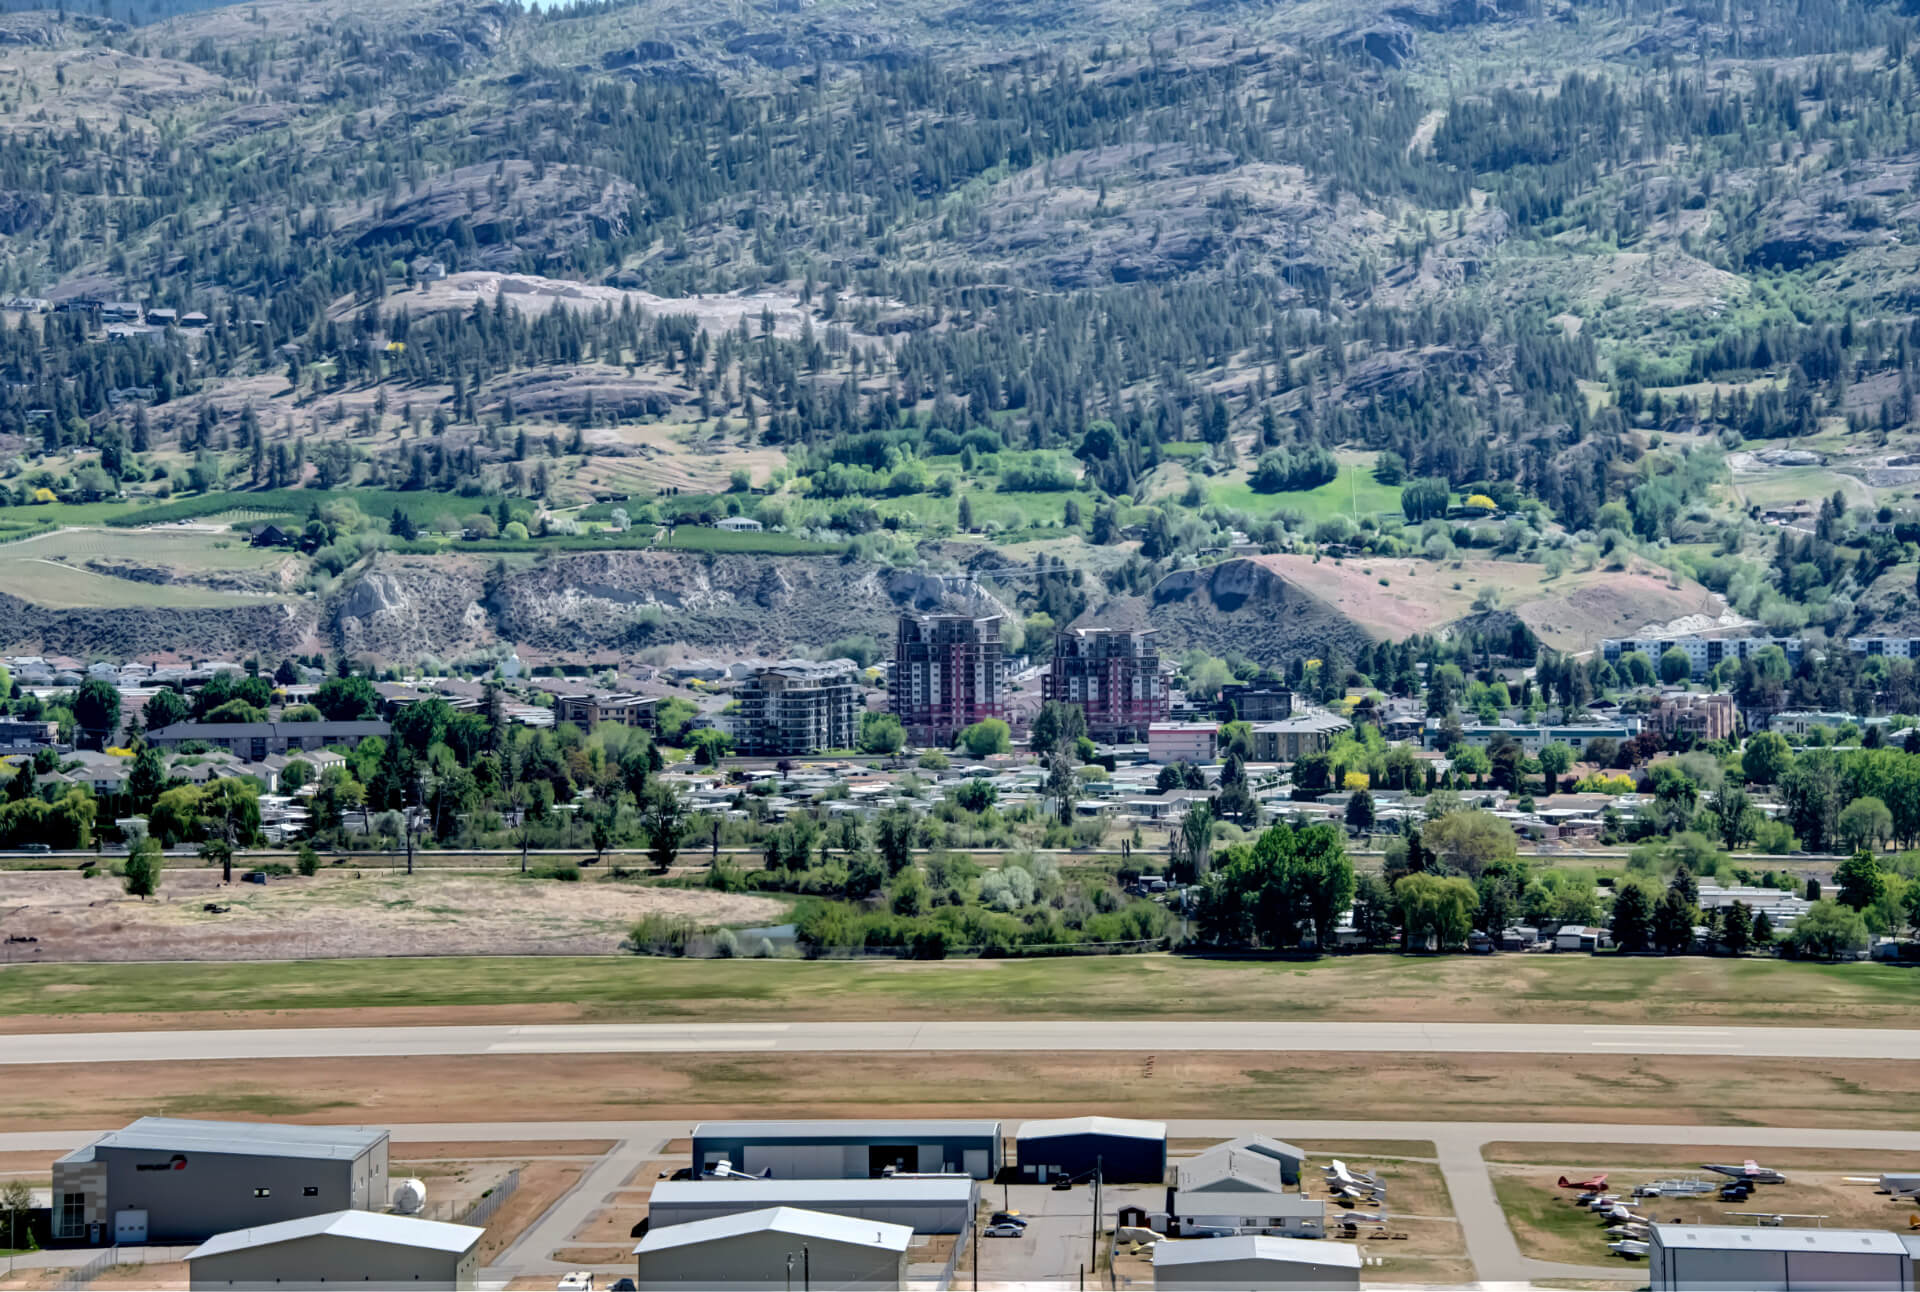 View of Penticton hillside, with condo towers in center of image.